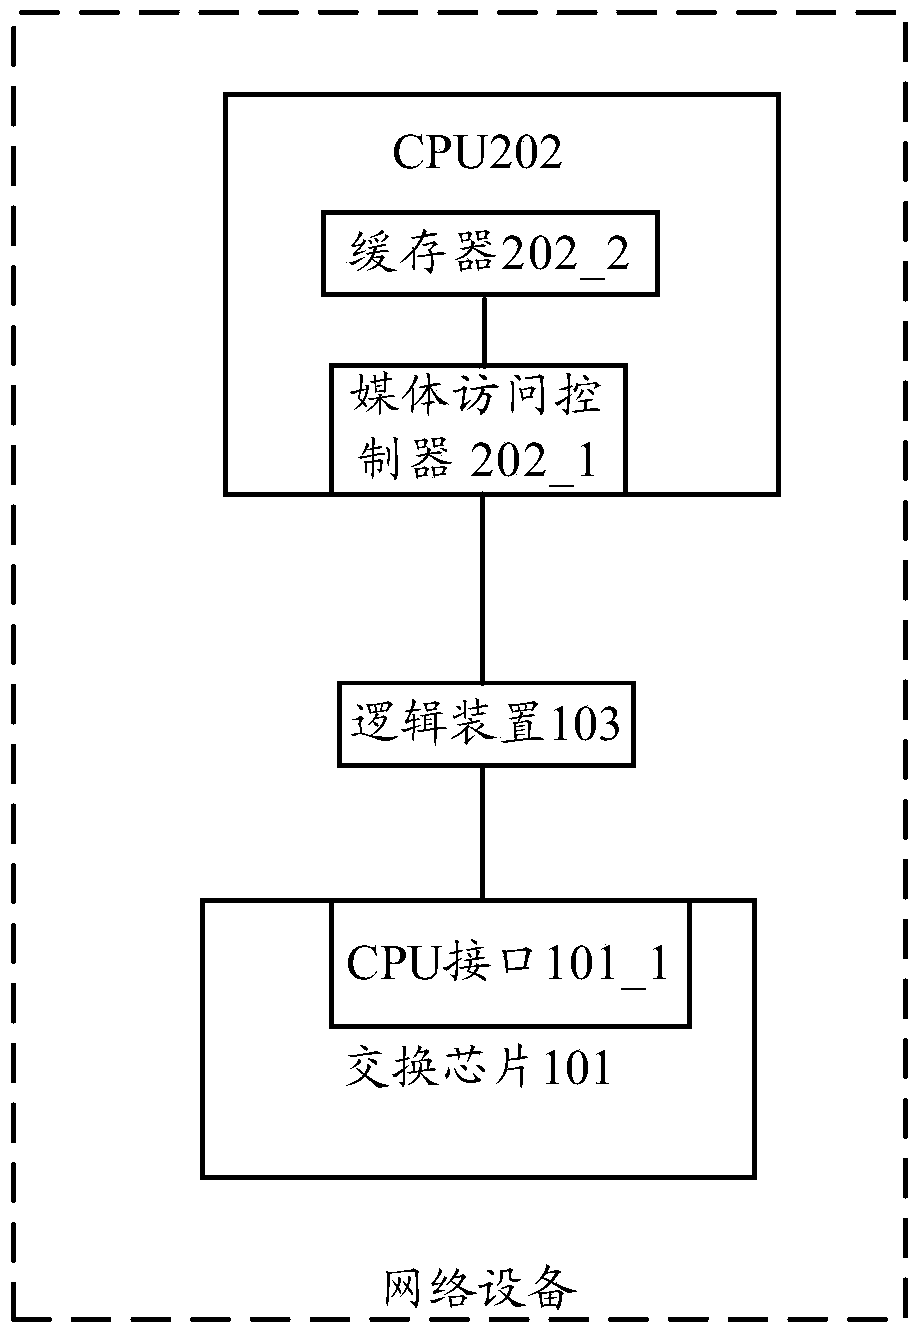 Network equipment and virtual device